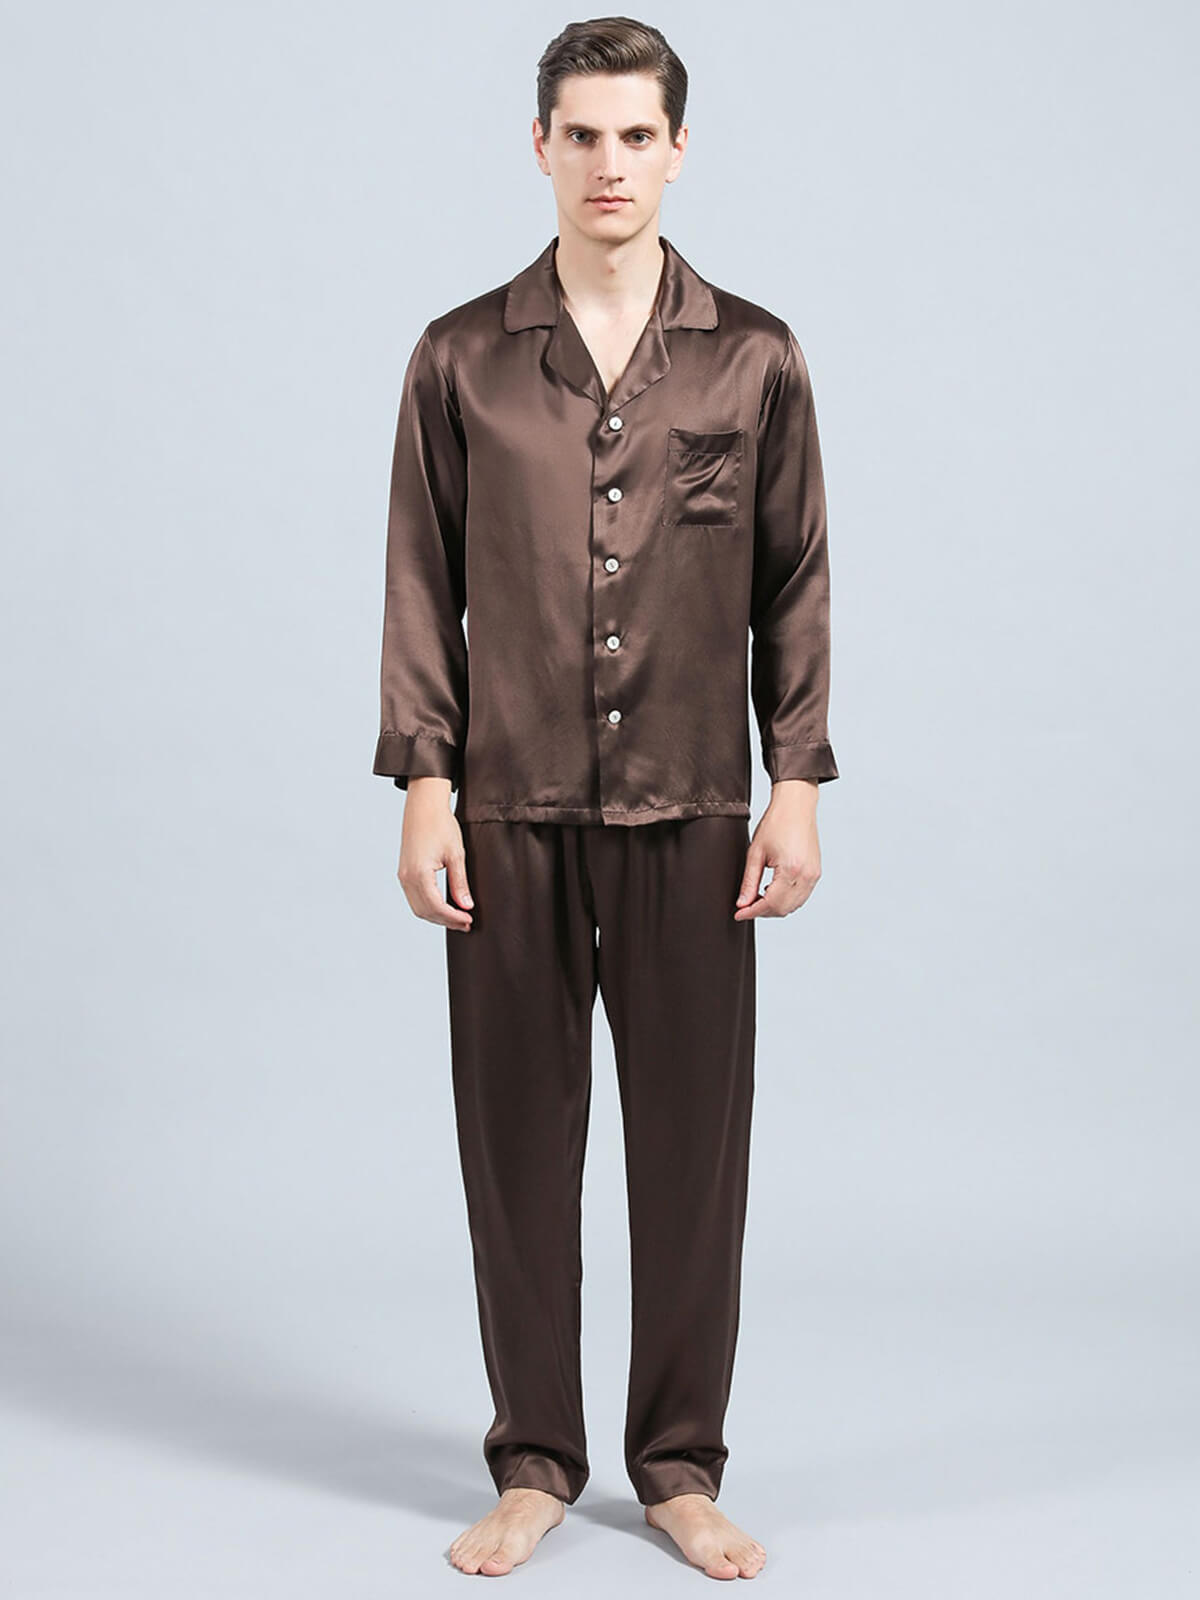 19 Momme Mens Classic Silk Pajama Sets